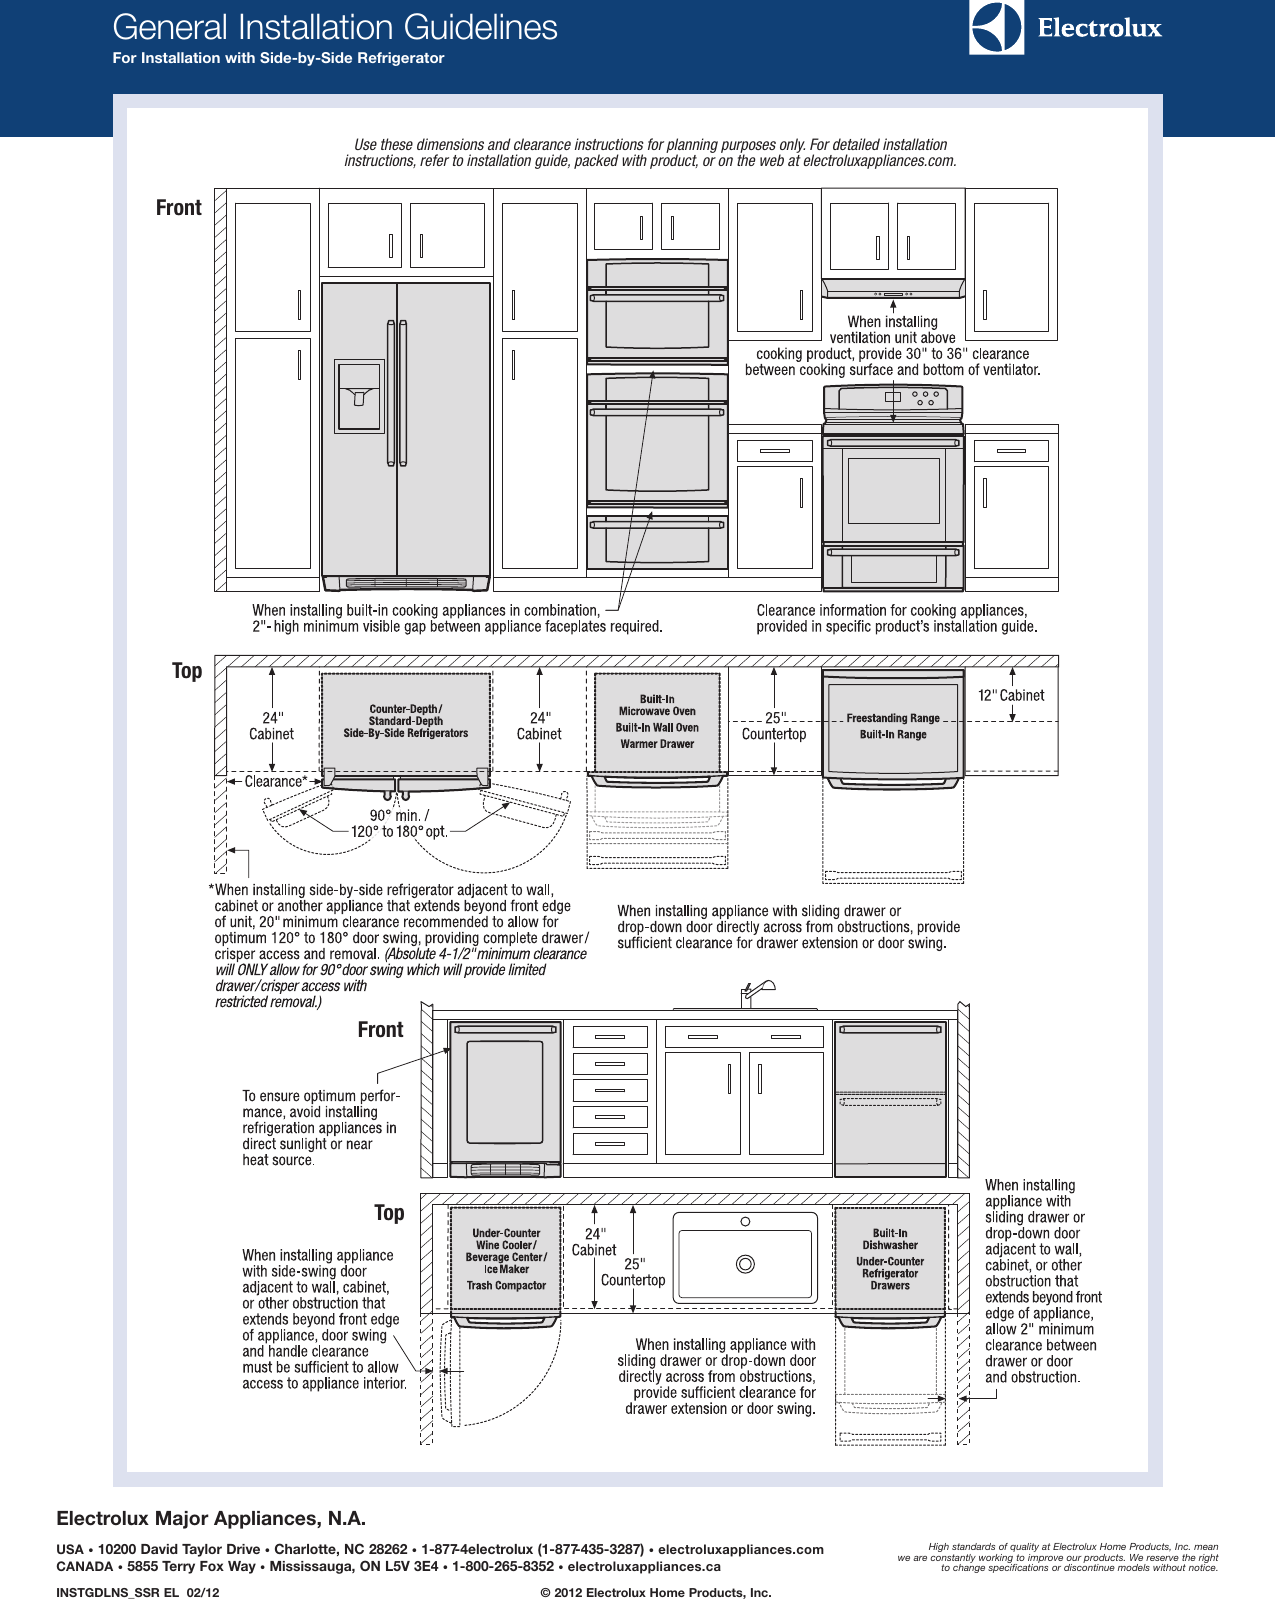 Page 4 of 6 - Electrolux Electrolux-24-Under-Counter-Wine-Cooler-With-Right-Door-Swing-Ei24Wc10Qs-Product-Specifications-Sheet-  Electrolux-24-under-counter-wine-cooler-with-right-door-swing-ei24wc10qs-product-specifications-sheet